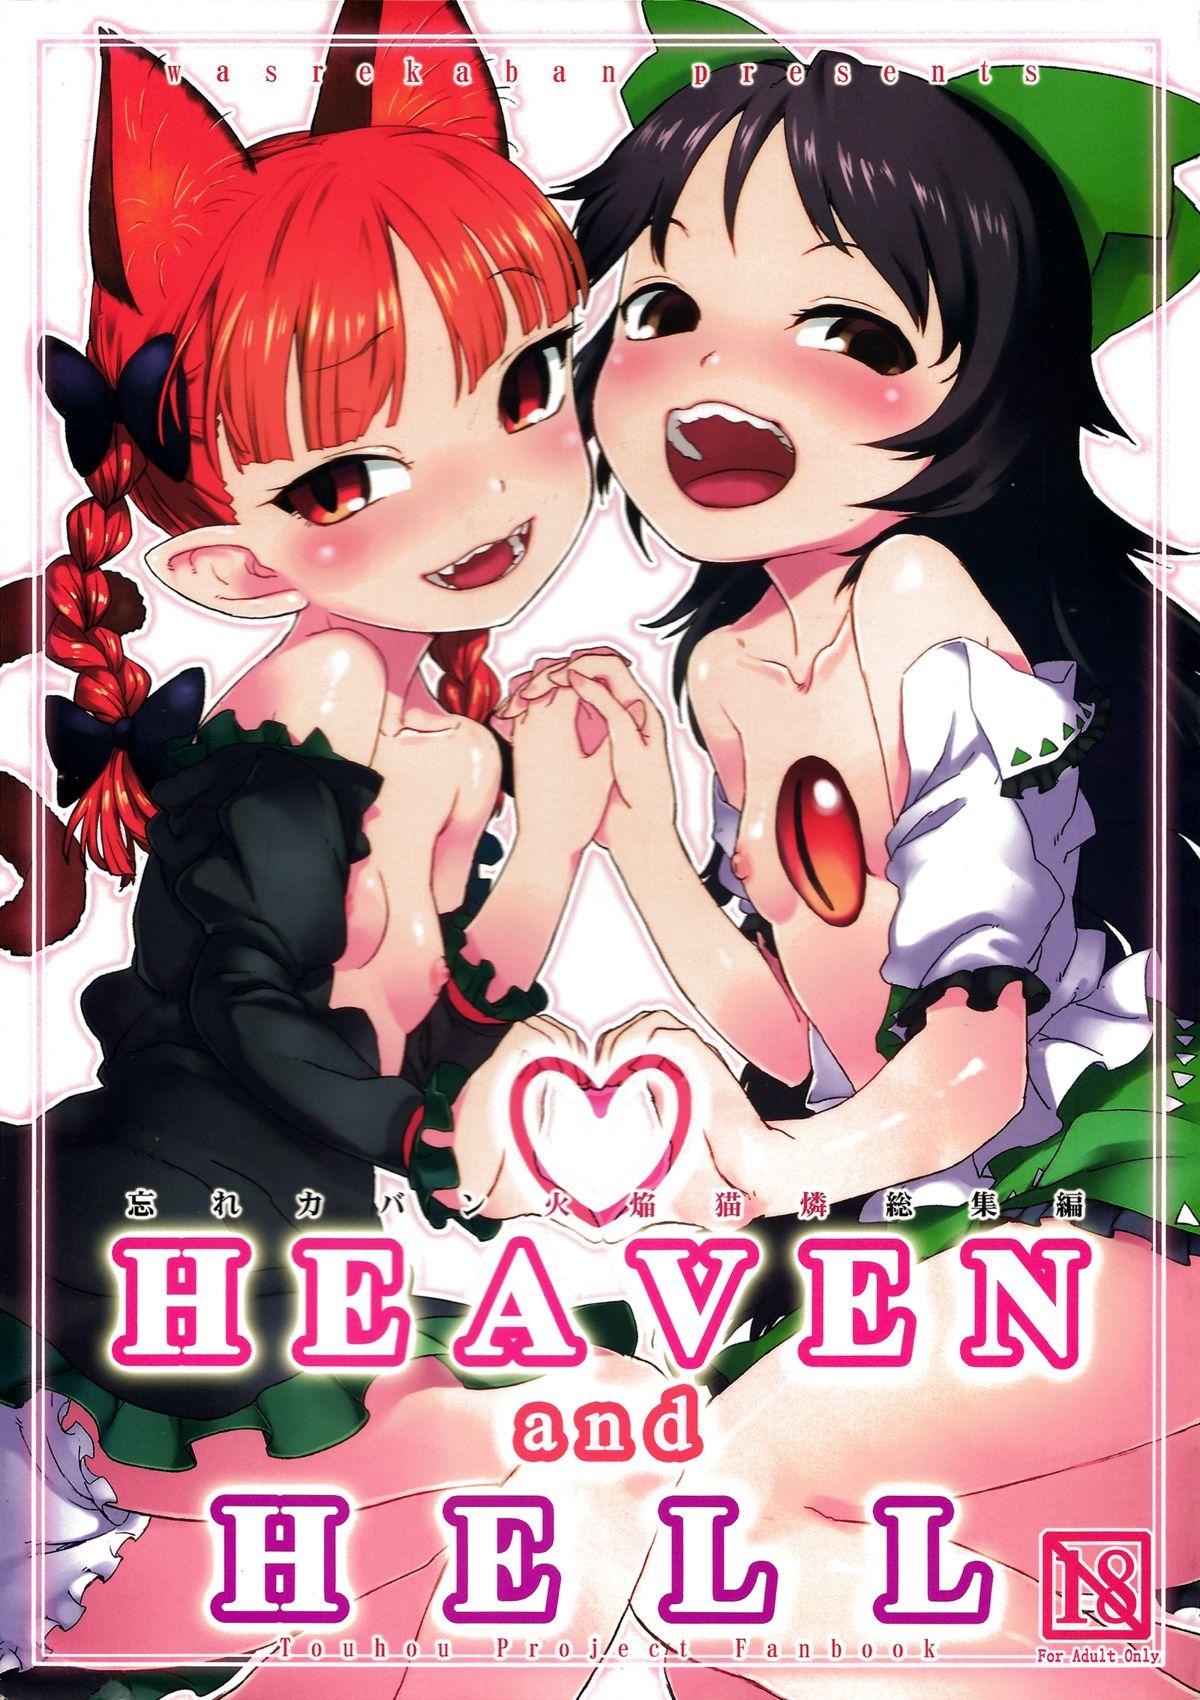 HEAVEN and HELL 0